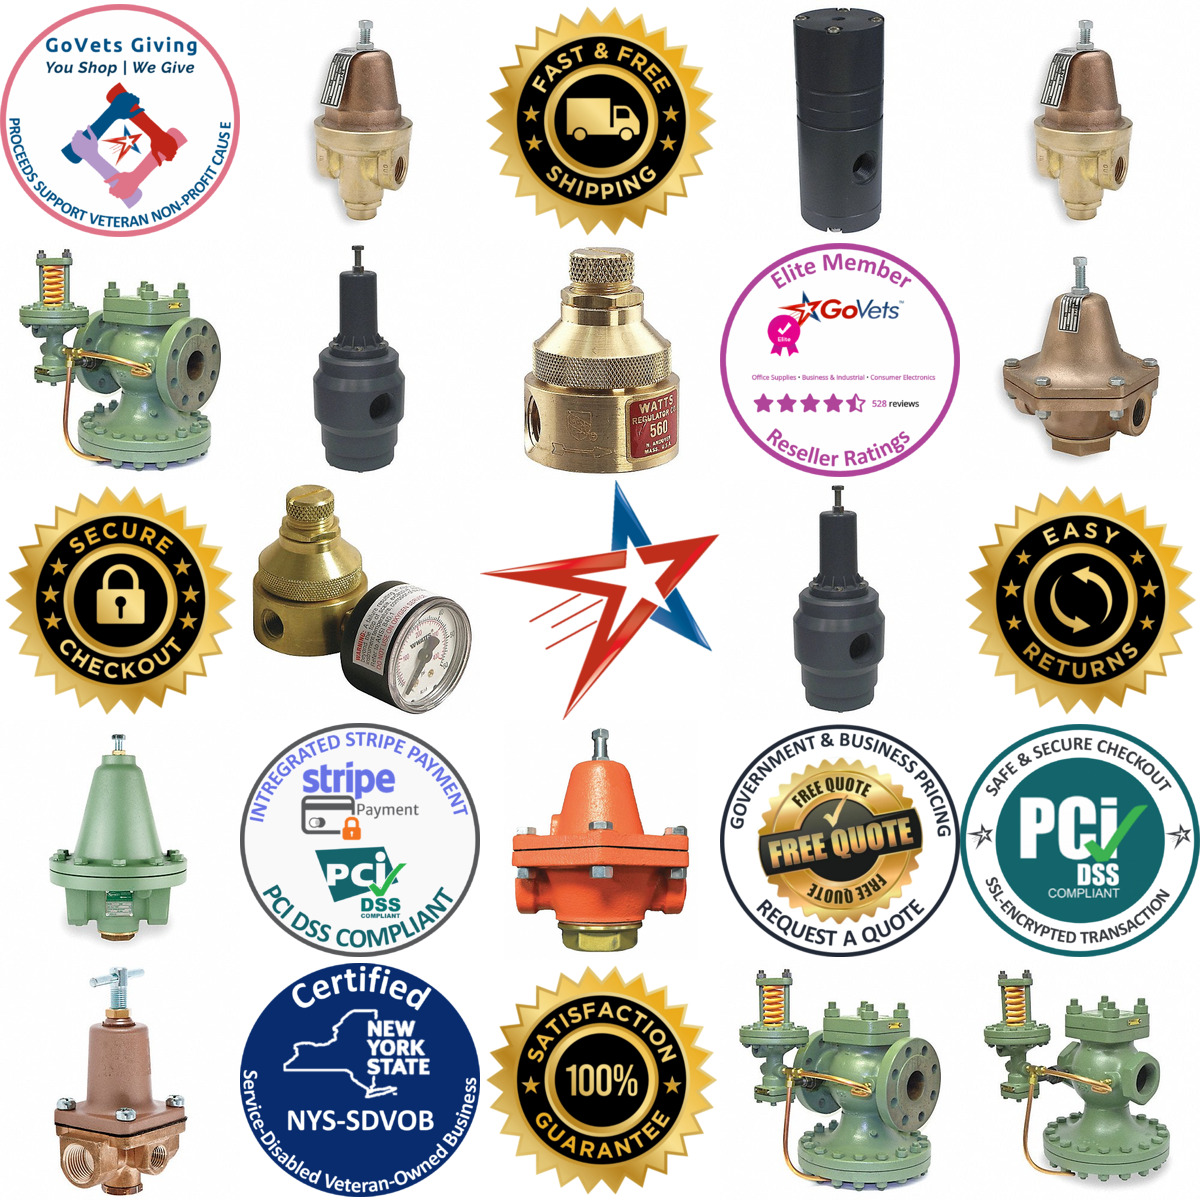 A selection of Pressure Regulators products on GoVets